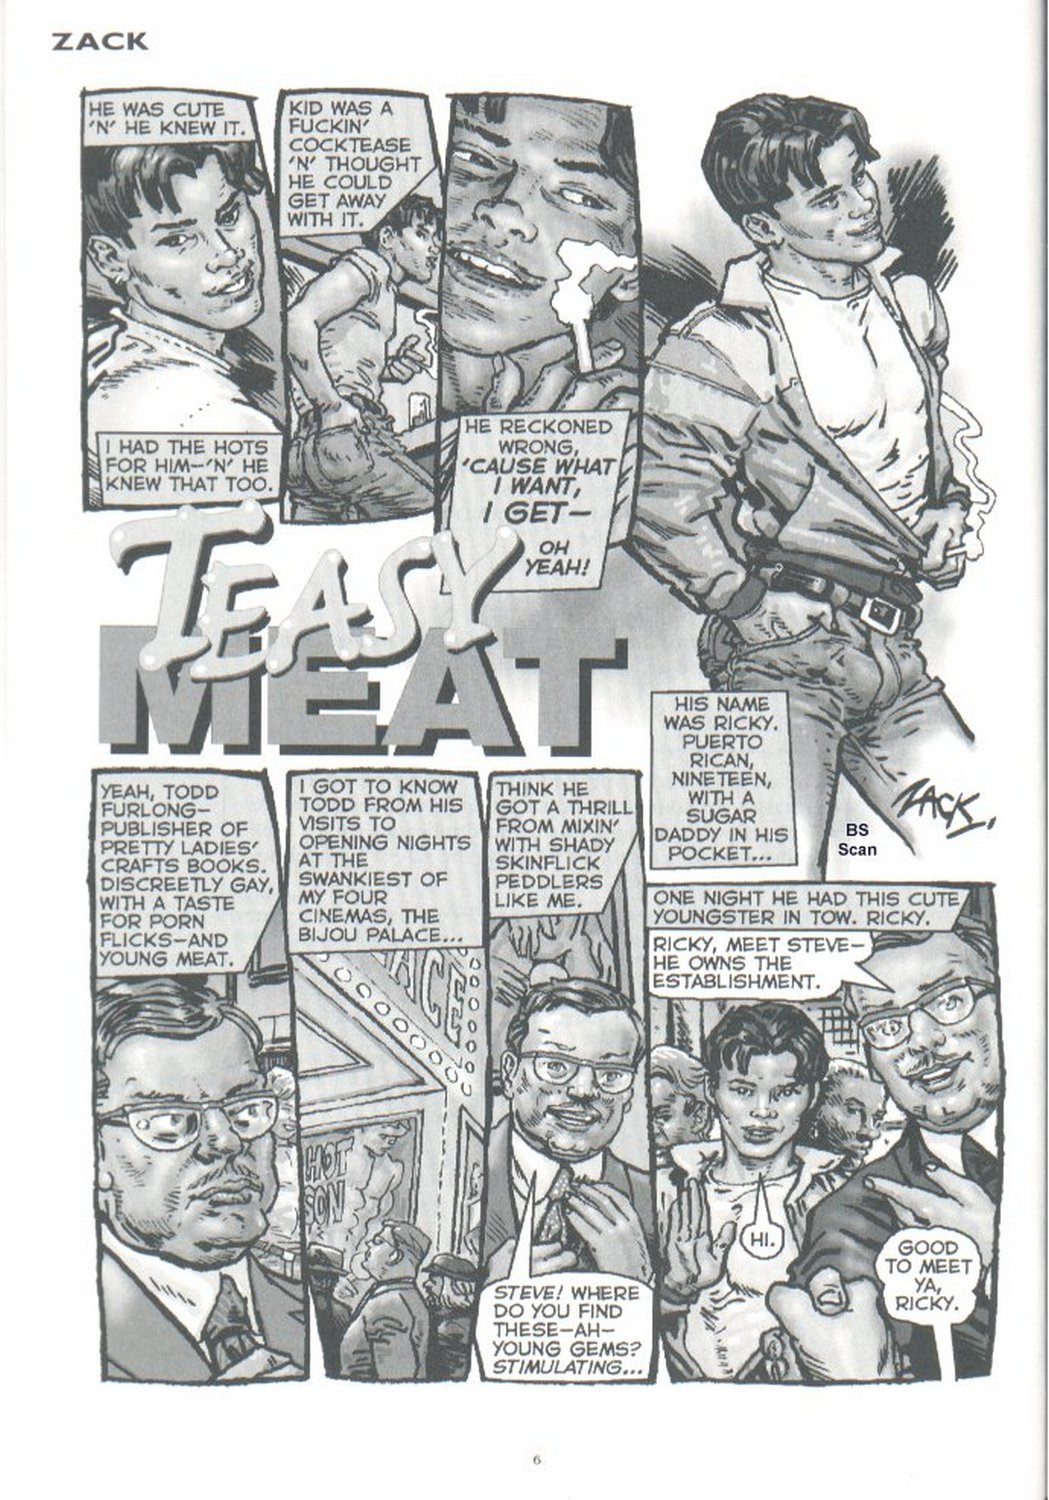 Cover Teasy Meat